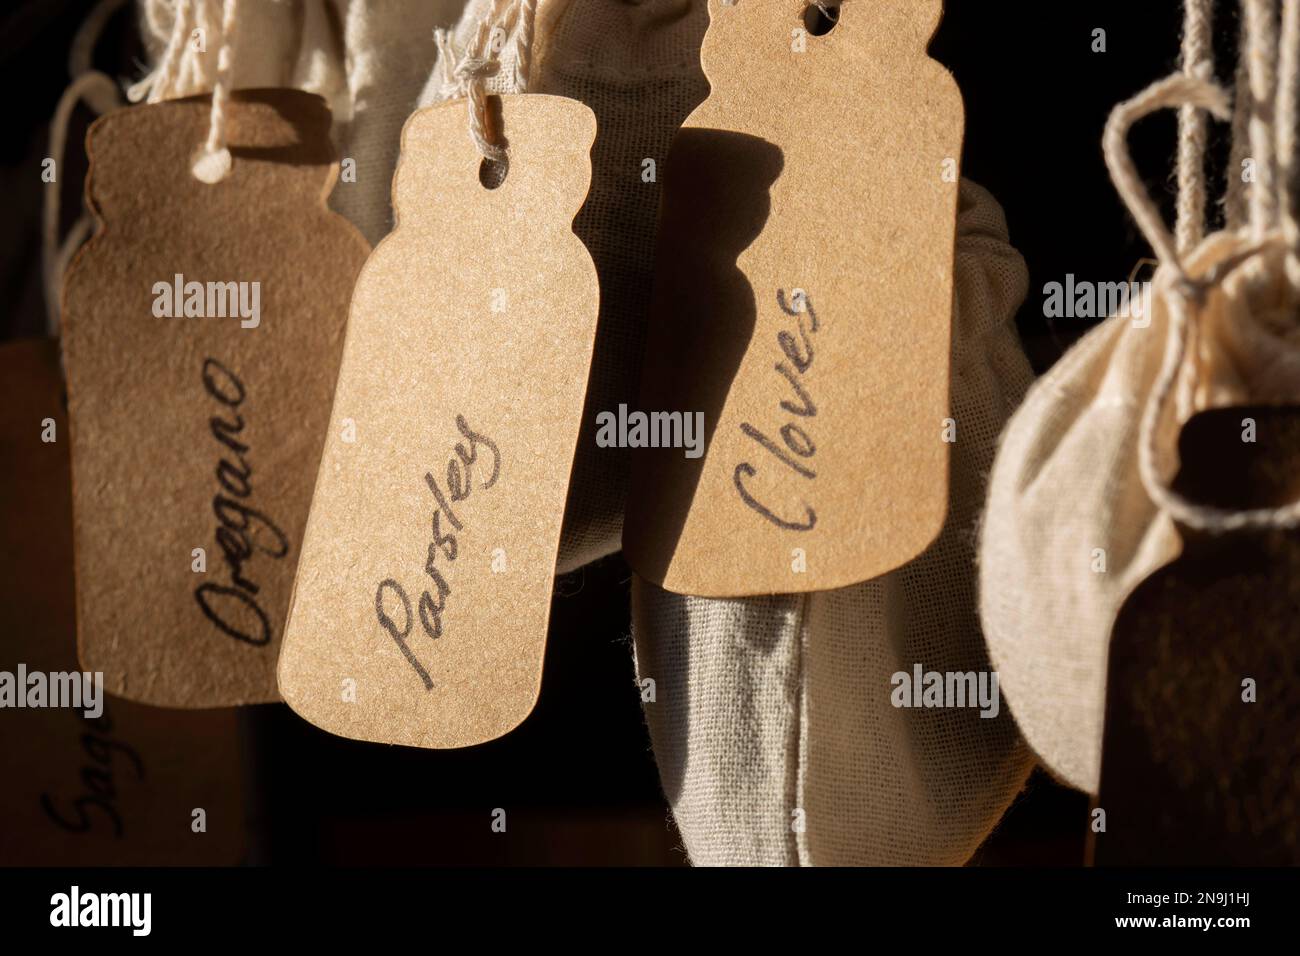 Herbs in jute bags sacks, parsley, sage, oregano and cloves, hanging on  metal hooks in a kitchen. labelled with card tags Stock Photo - Alamy